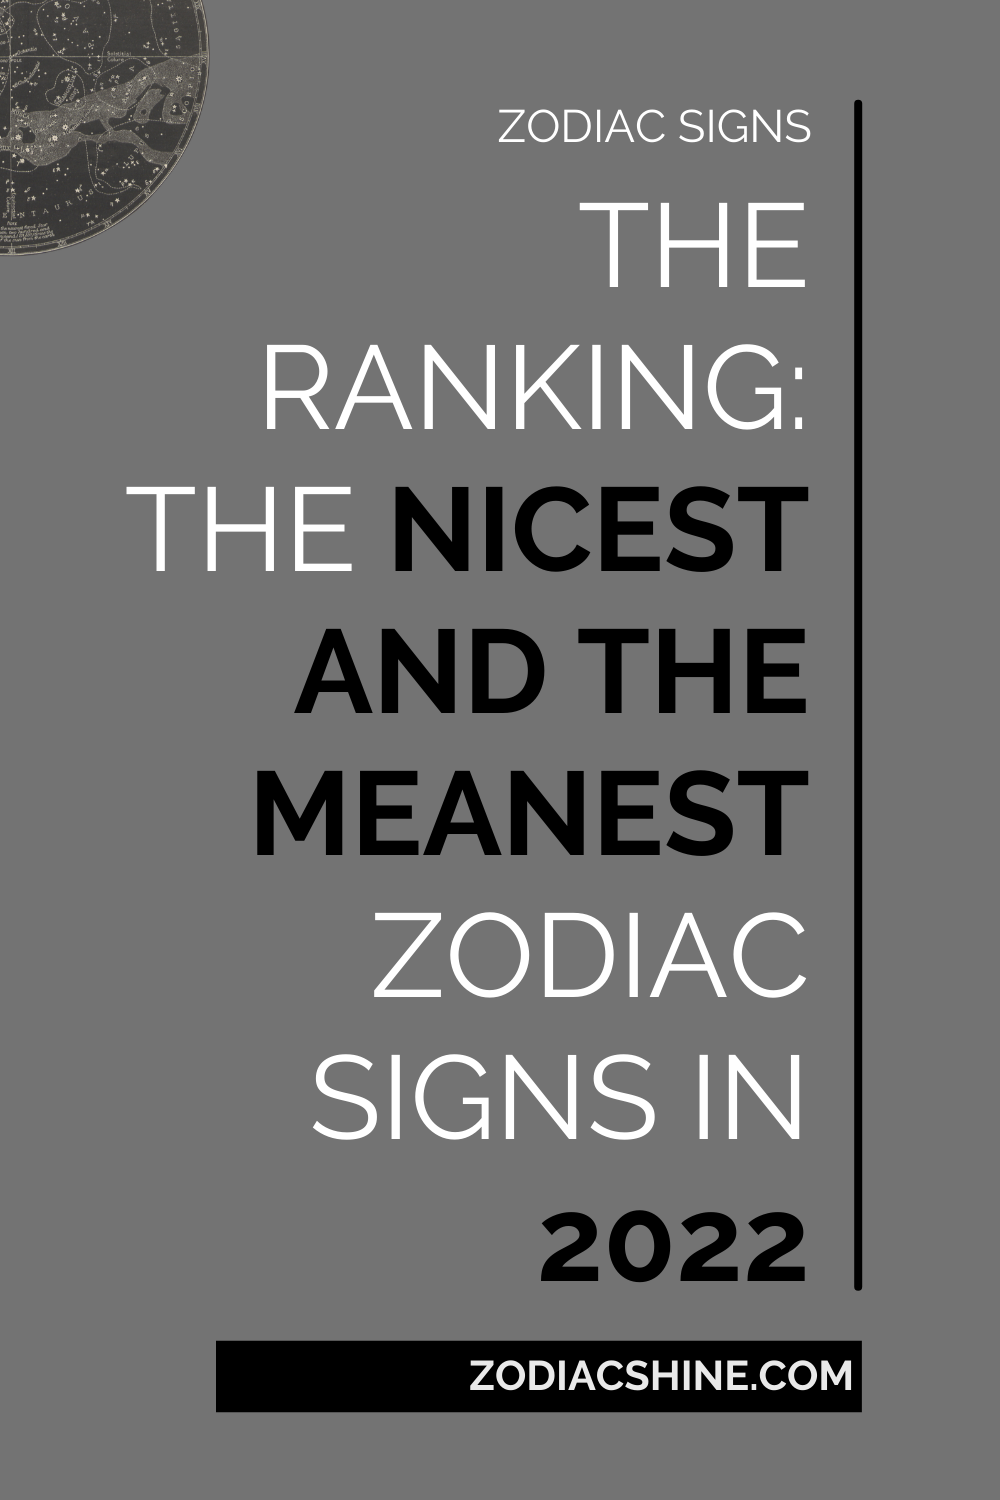 The Ranking: The Nicest And The Meanest Zodiac Signs In 2022